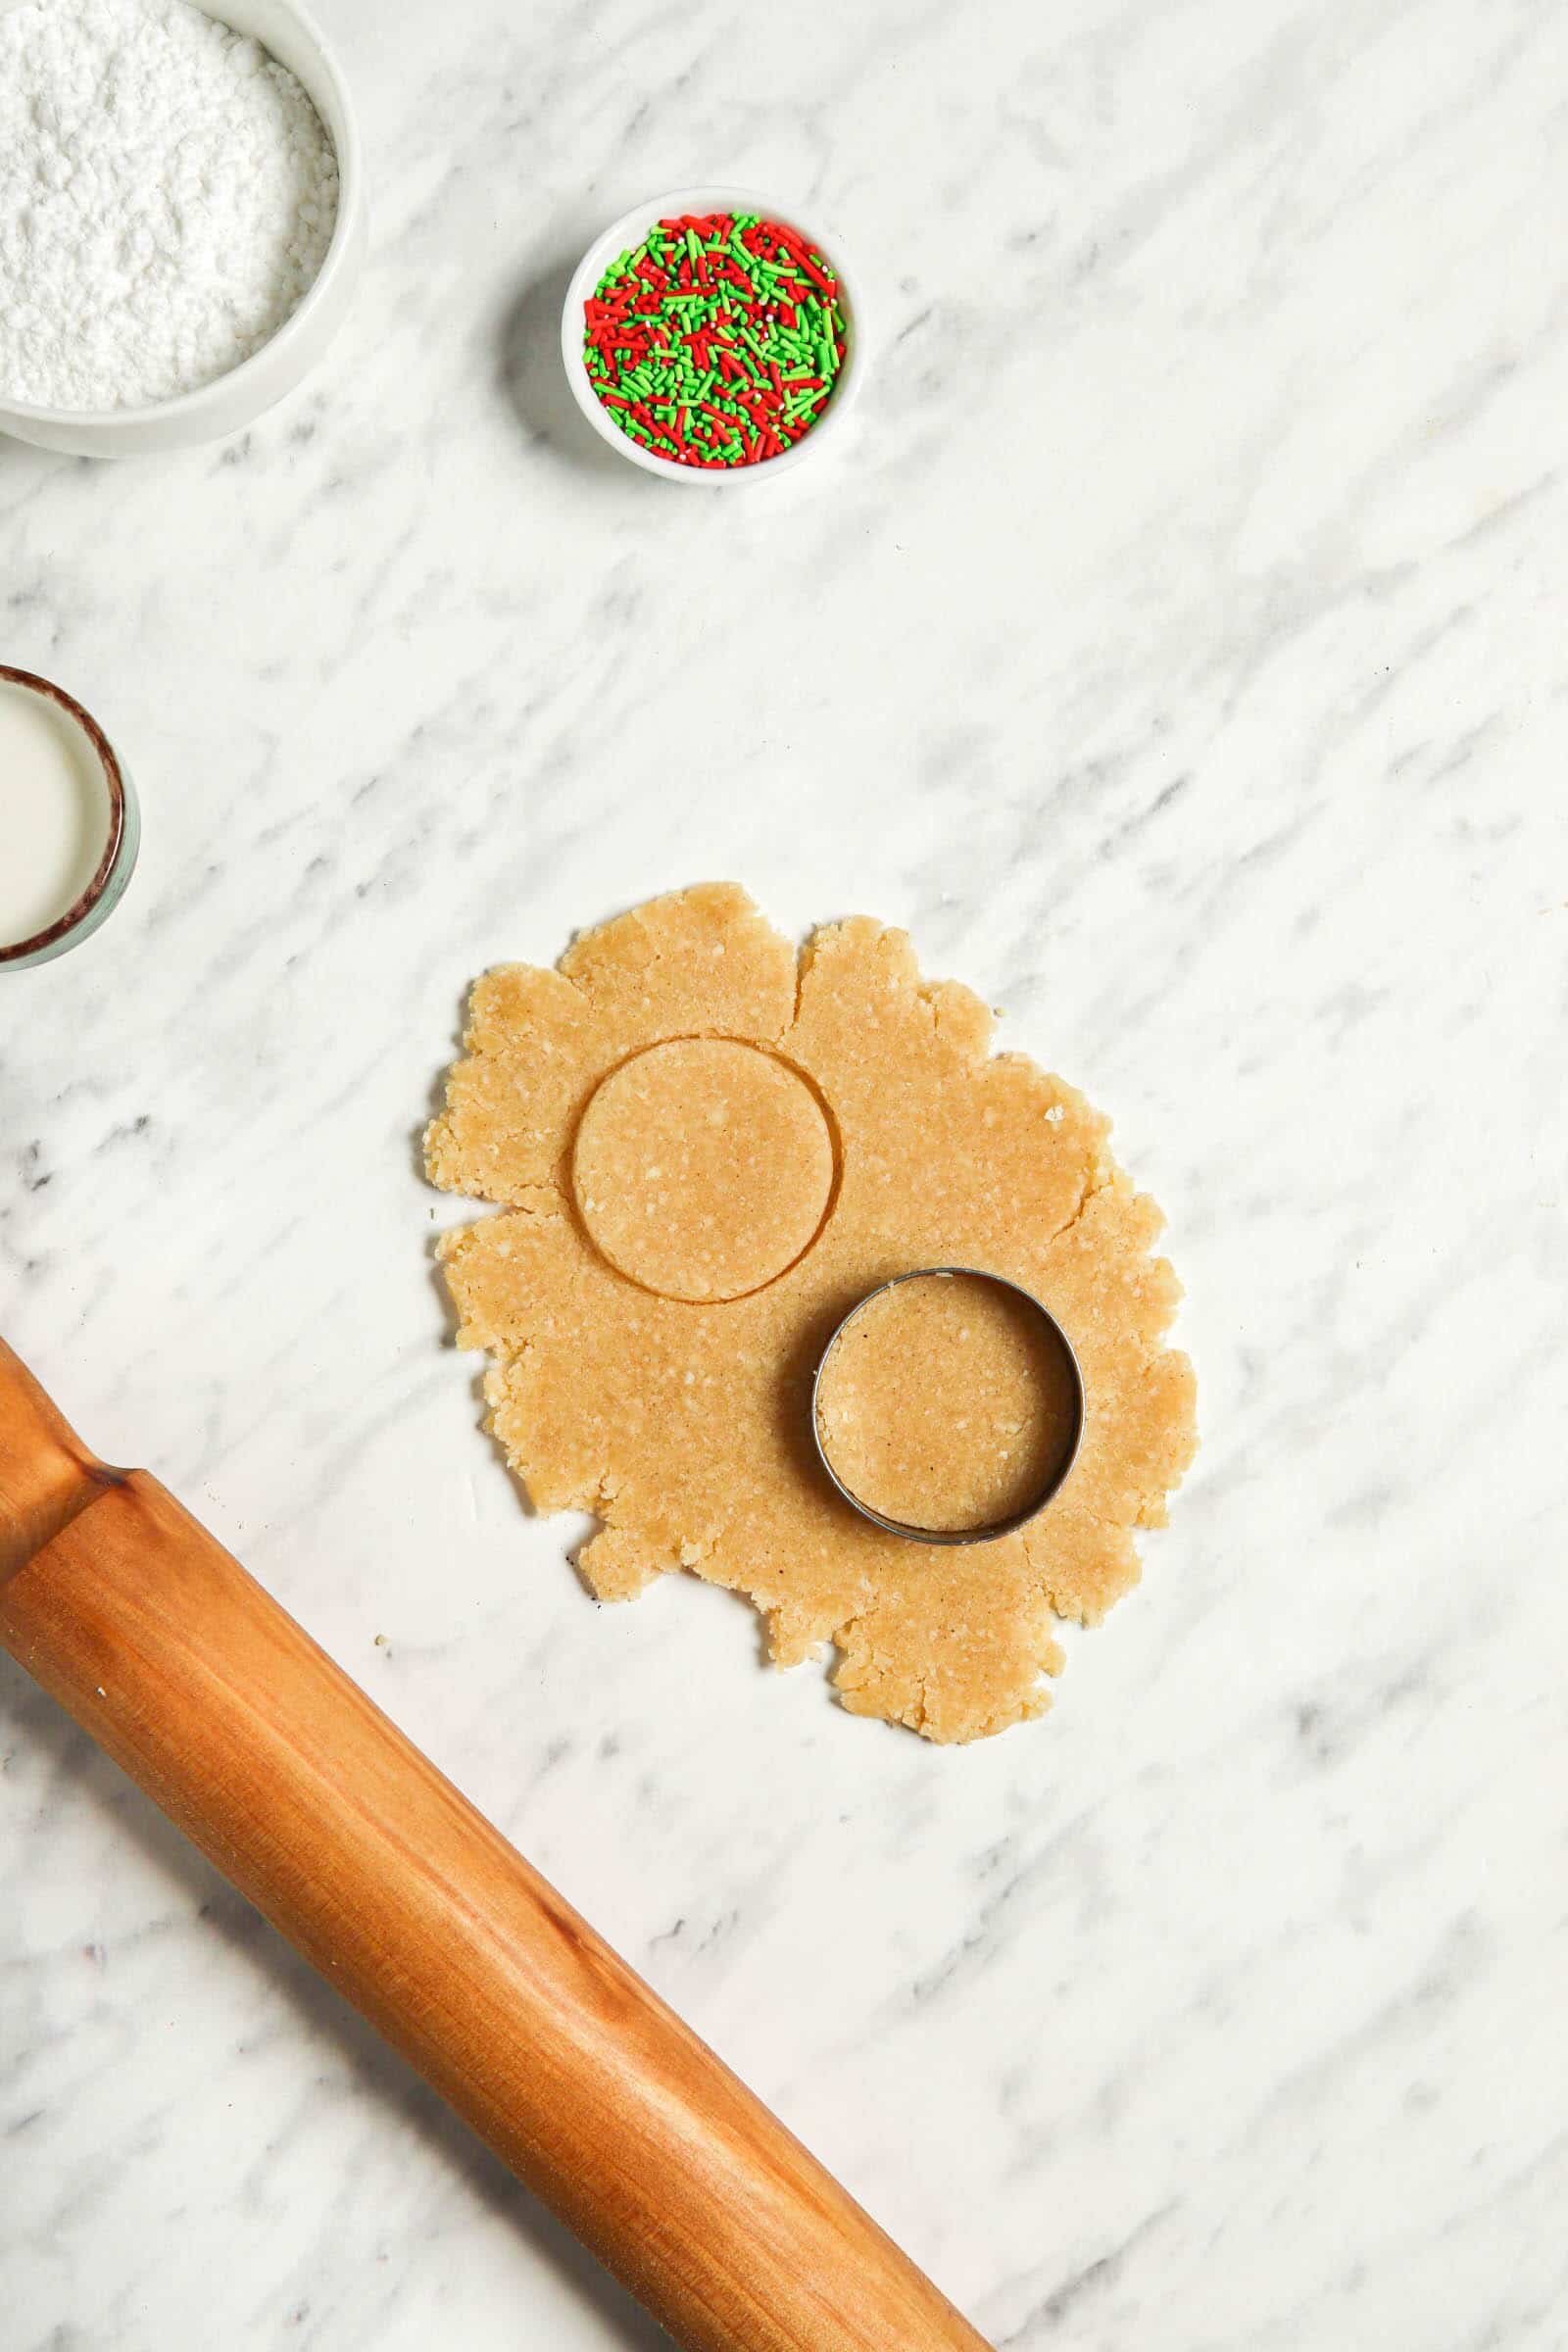 Dough for iced sugar cookies on a white background with cookie cut outs and a rolling pin.